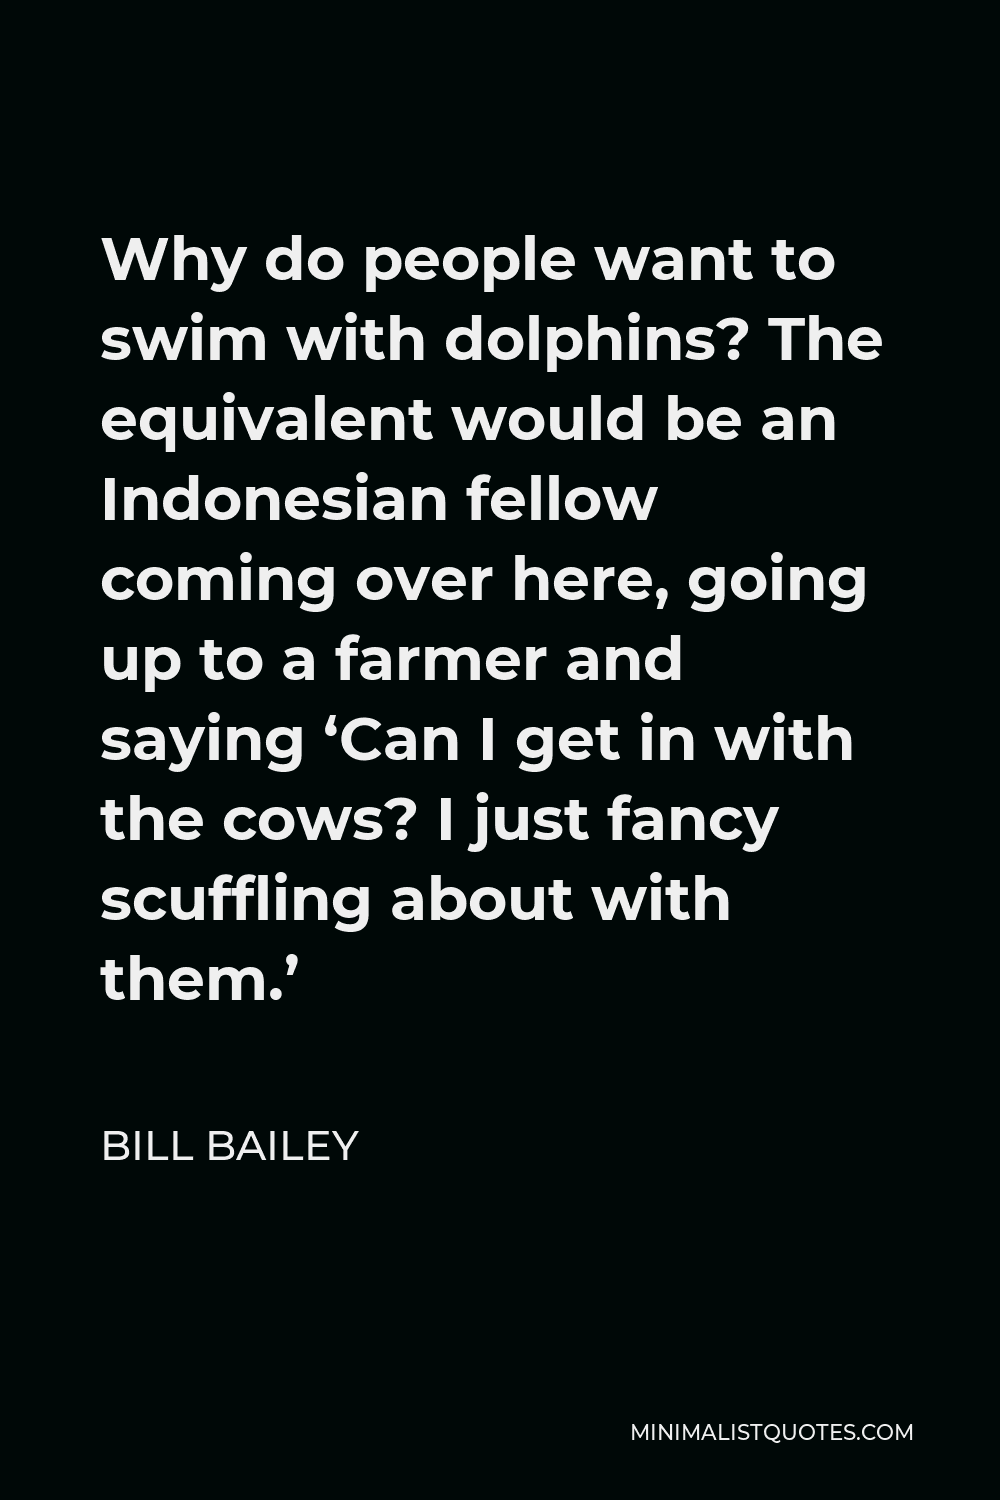 Bill Bailey Quote - Why do people want to swim with dolphins? The equivalent would be an Indonesian fellow coming over here, going up to a farmer and saying ‘Can I get in with the cows? I just fancy scuffling about with them.’